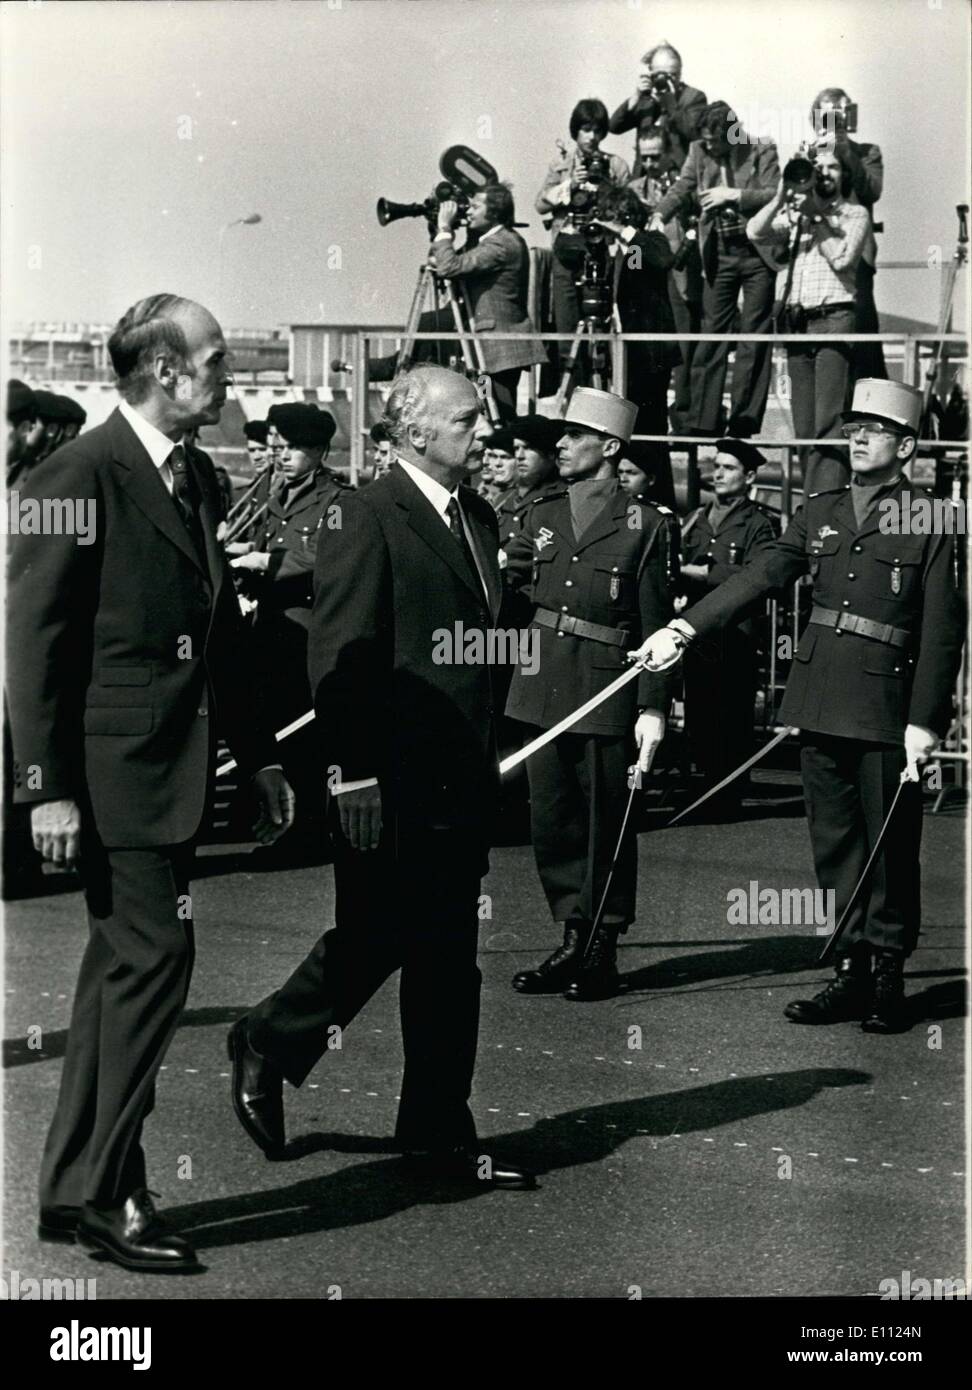 Apr. 21, 1975 - Mr. Walter Scheel, President of Germany, and his wife arrived in Paris this afternoon for a 5-day official visit in France. Picture: President Giscard d'Estaing (left) and Mr. Walter Scheel passing in front of the honor guard at Orly airport. Stock Photo